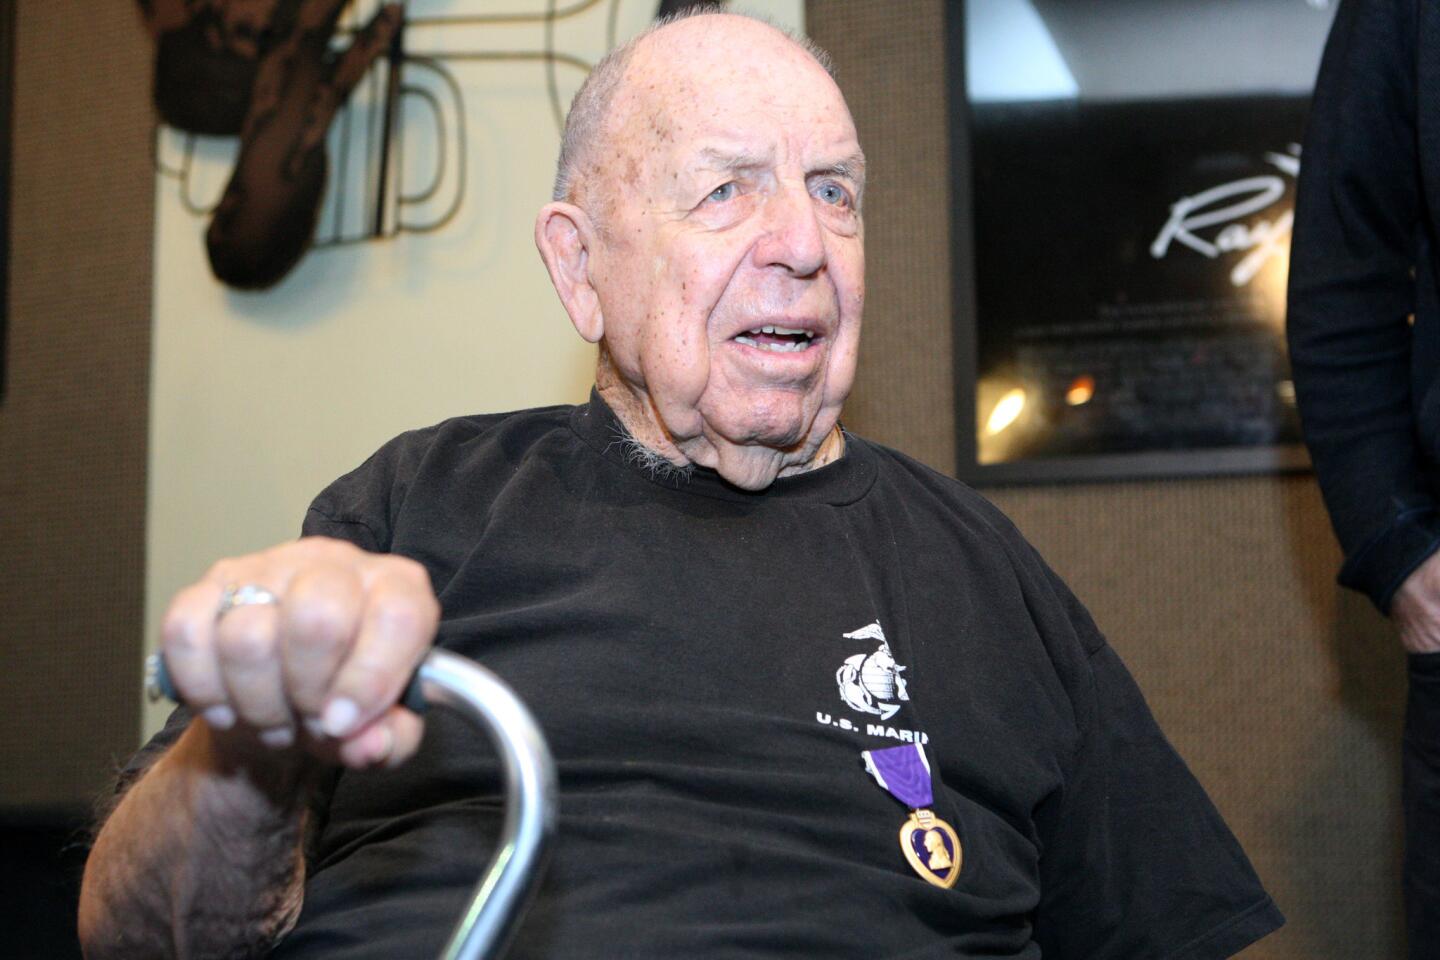 Photo Gallery: United States Marine receives Purple Heart almost 72 years after being injured at Iwo Jima during World War II